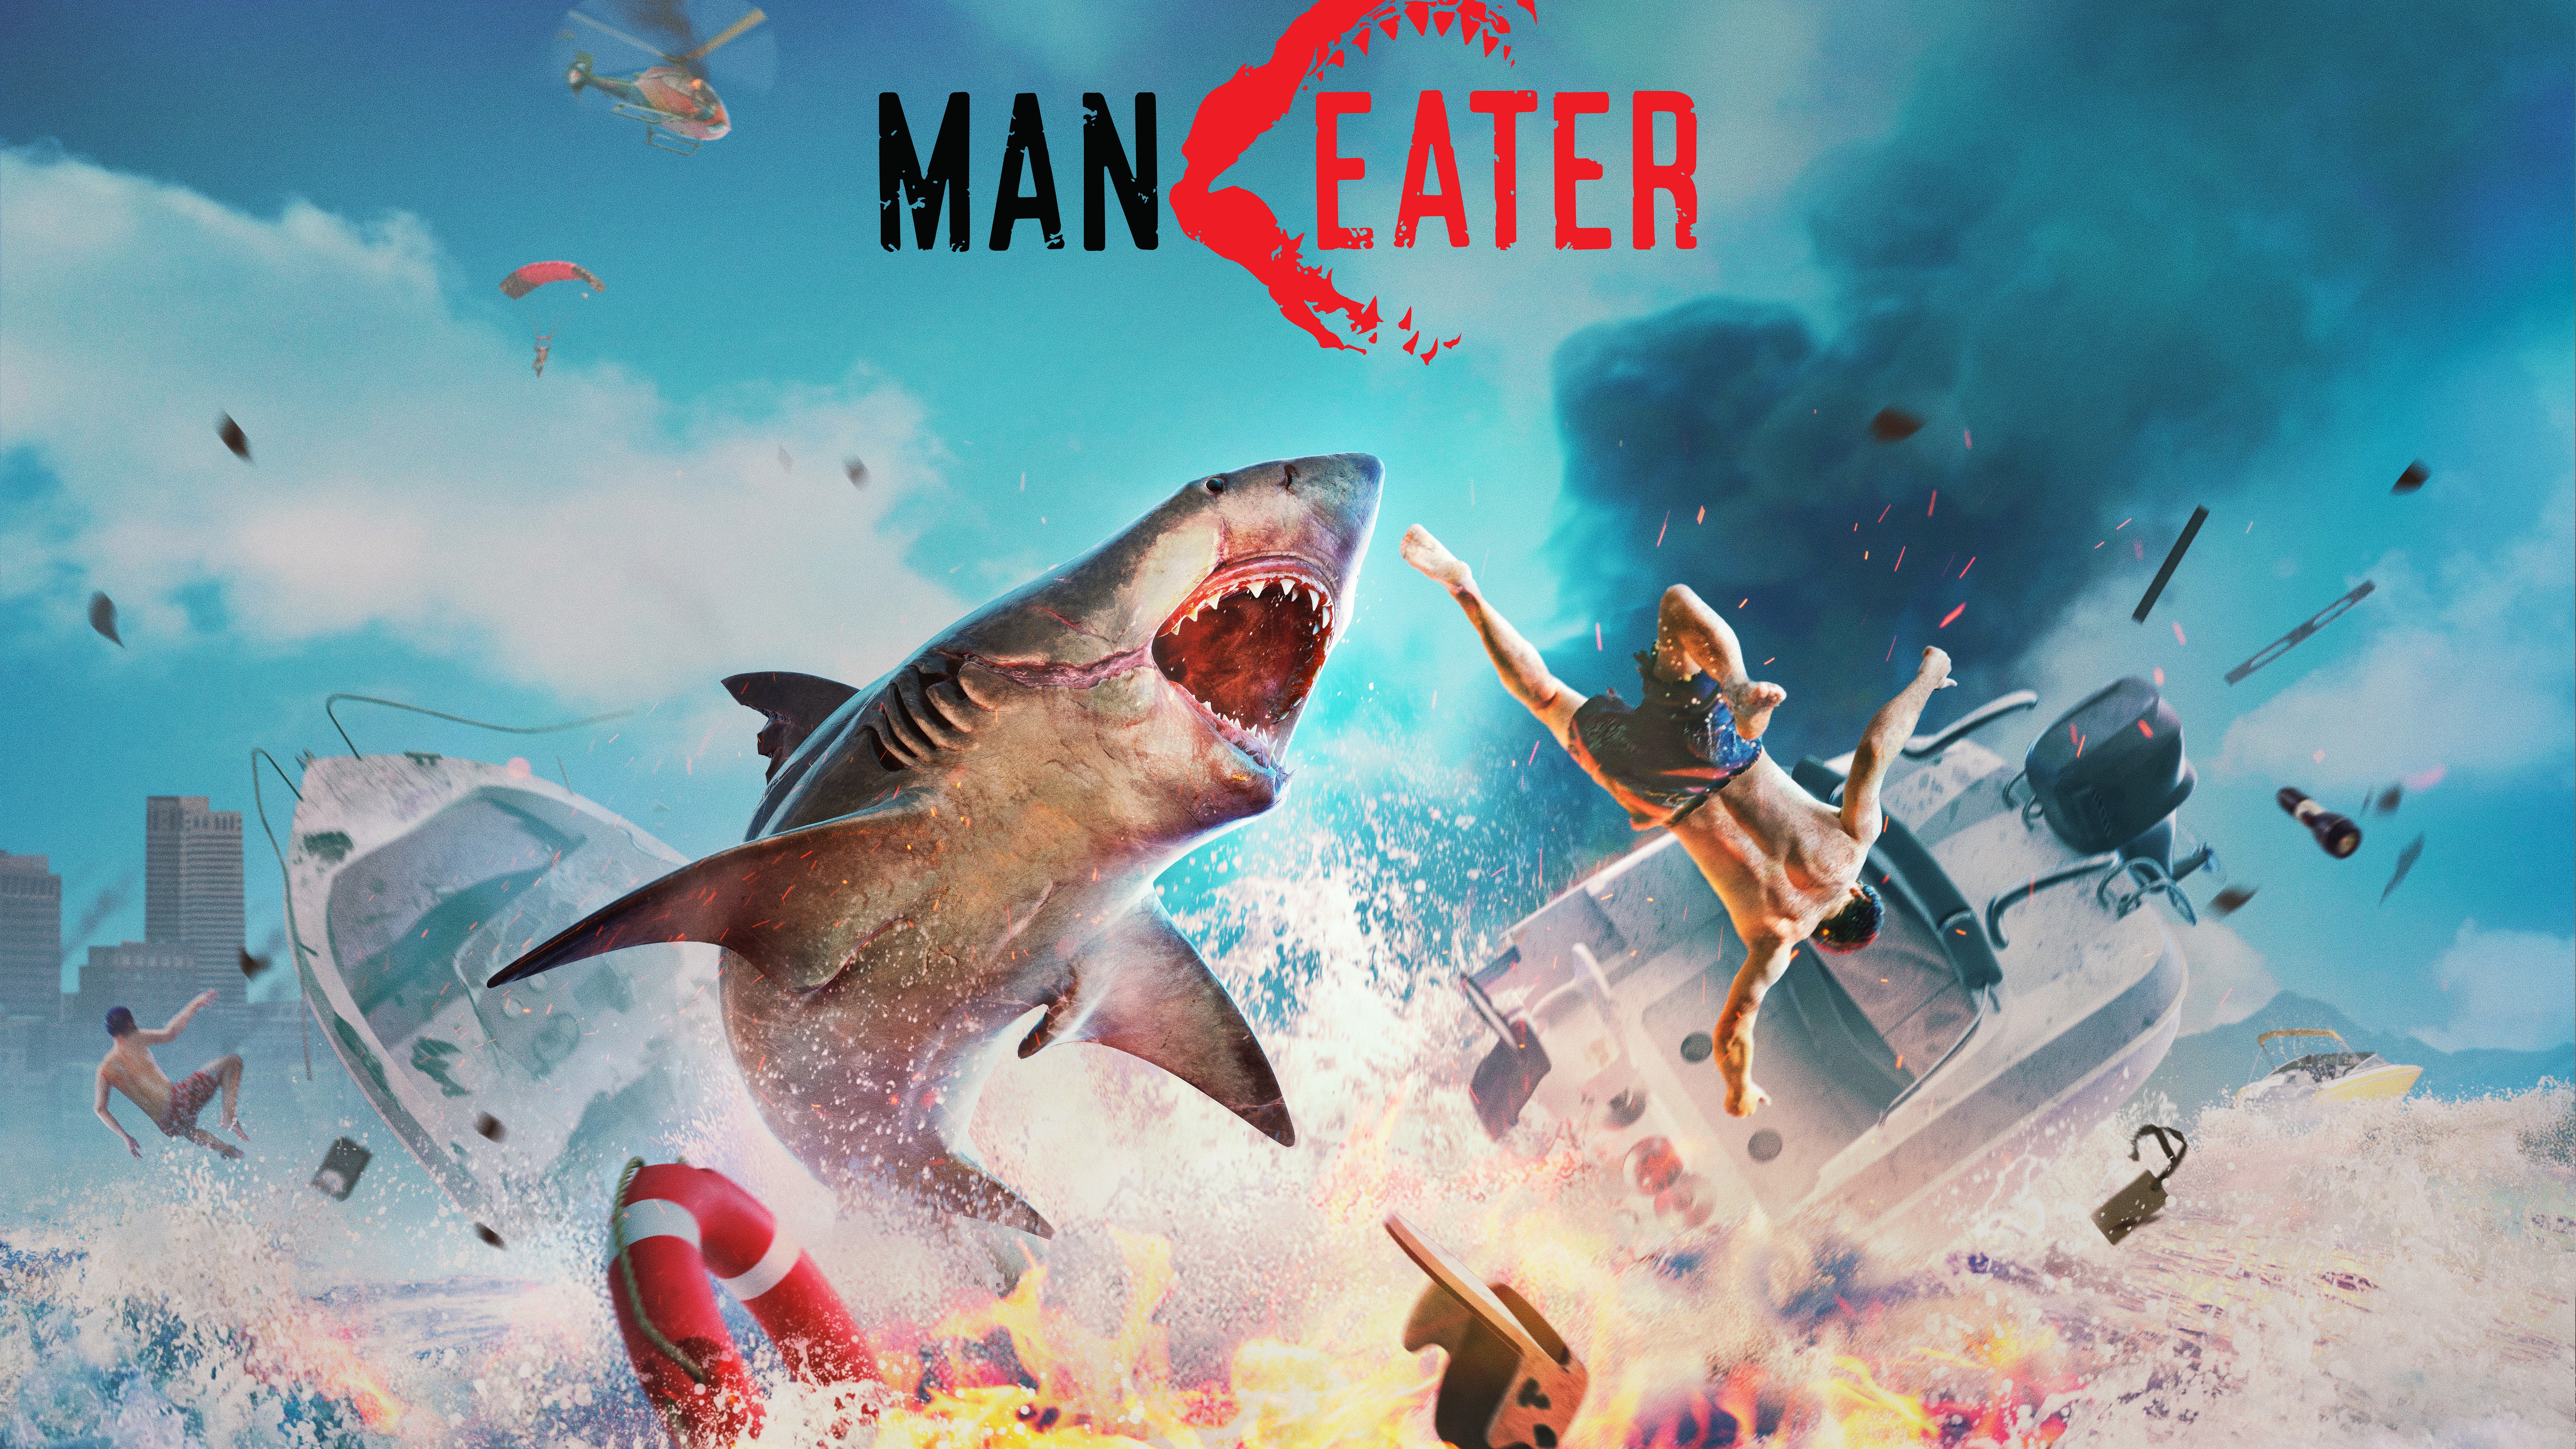 Hall maneater. Man Eater игра ps4.